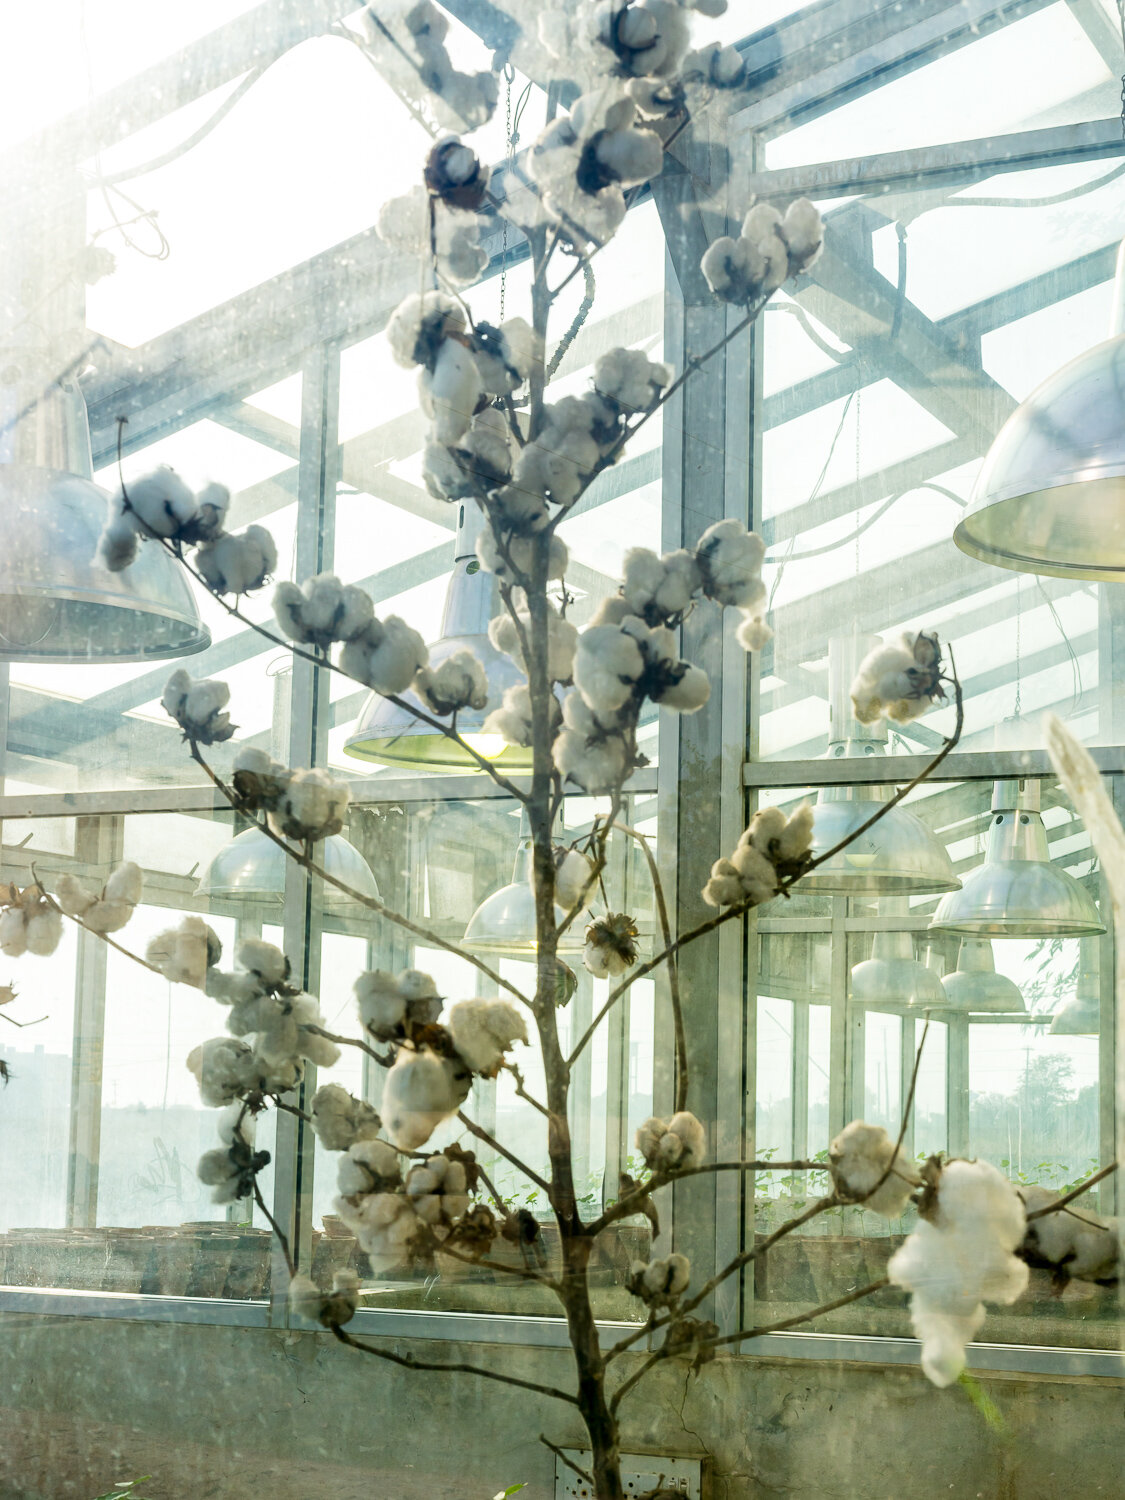  A cotton plant inside a greenhouse at the Central Cotton Research Institute on Saturday, November 18, 2017 in Multan, Punjab, Pakistan. The institute is one of several around the country where scientists are attempting to develop new cotton varietie